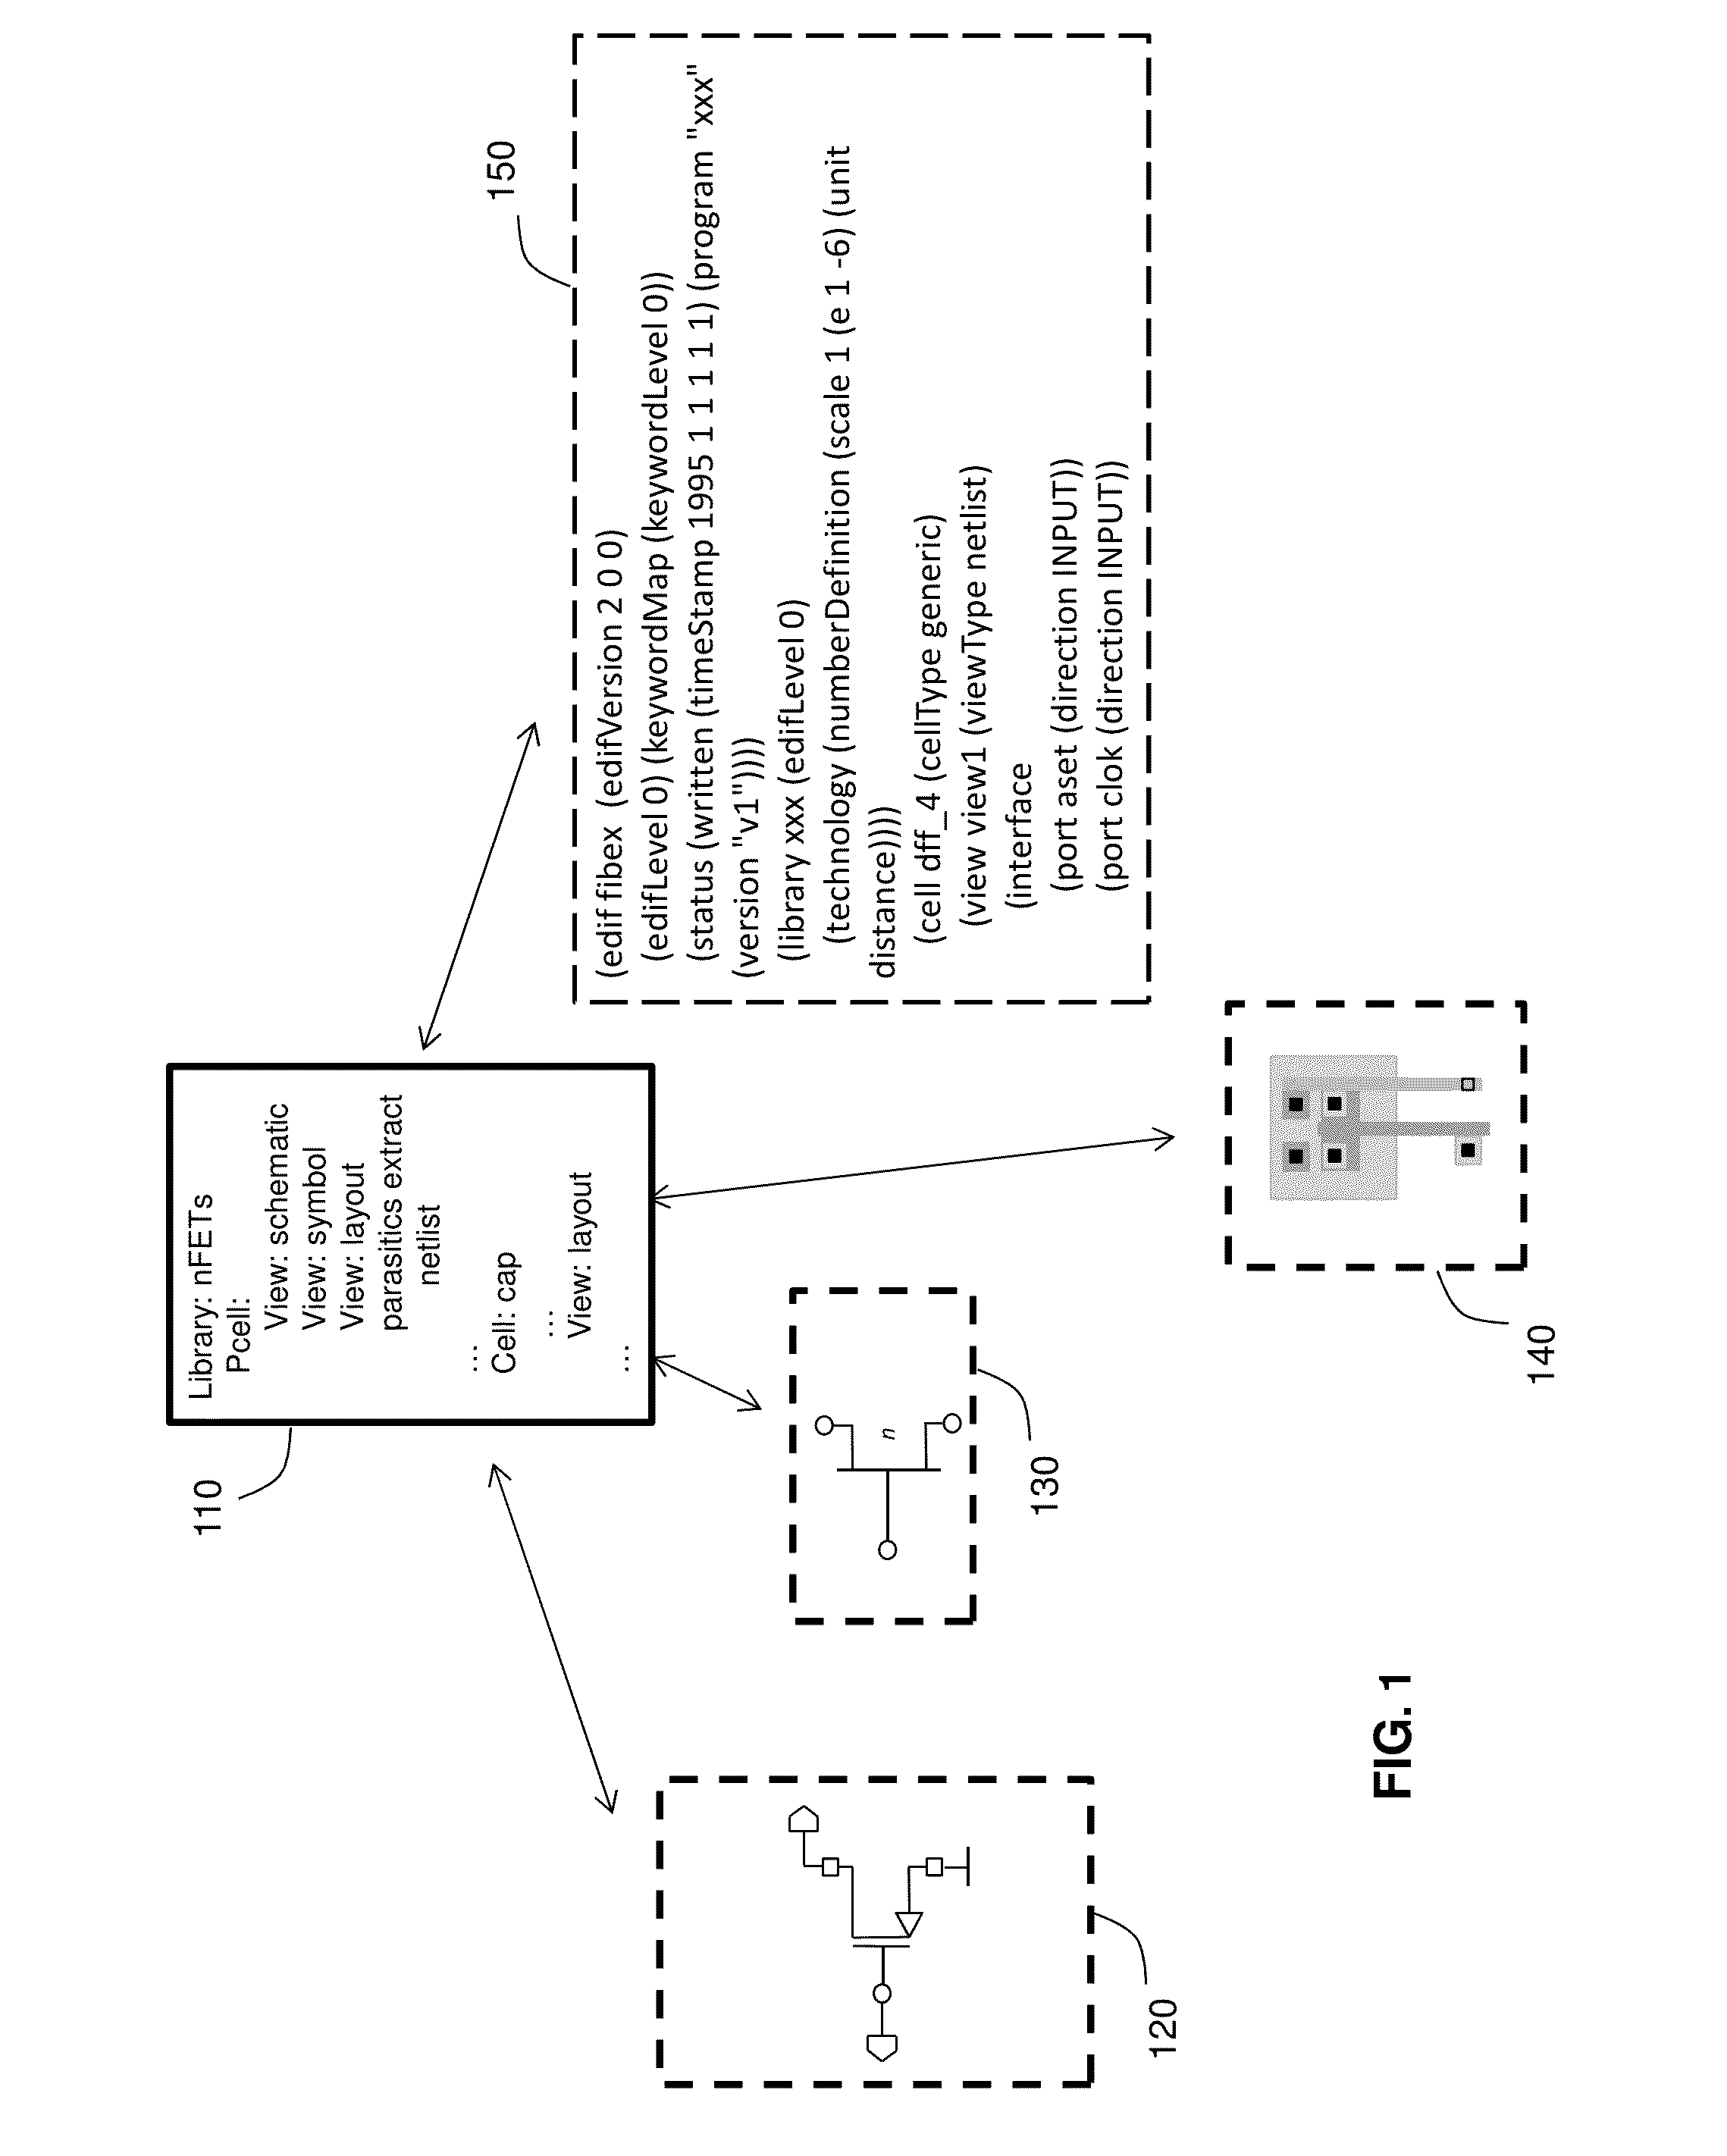 Generating an electromagnetic parameterized cell for an integrated circuit design